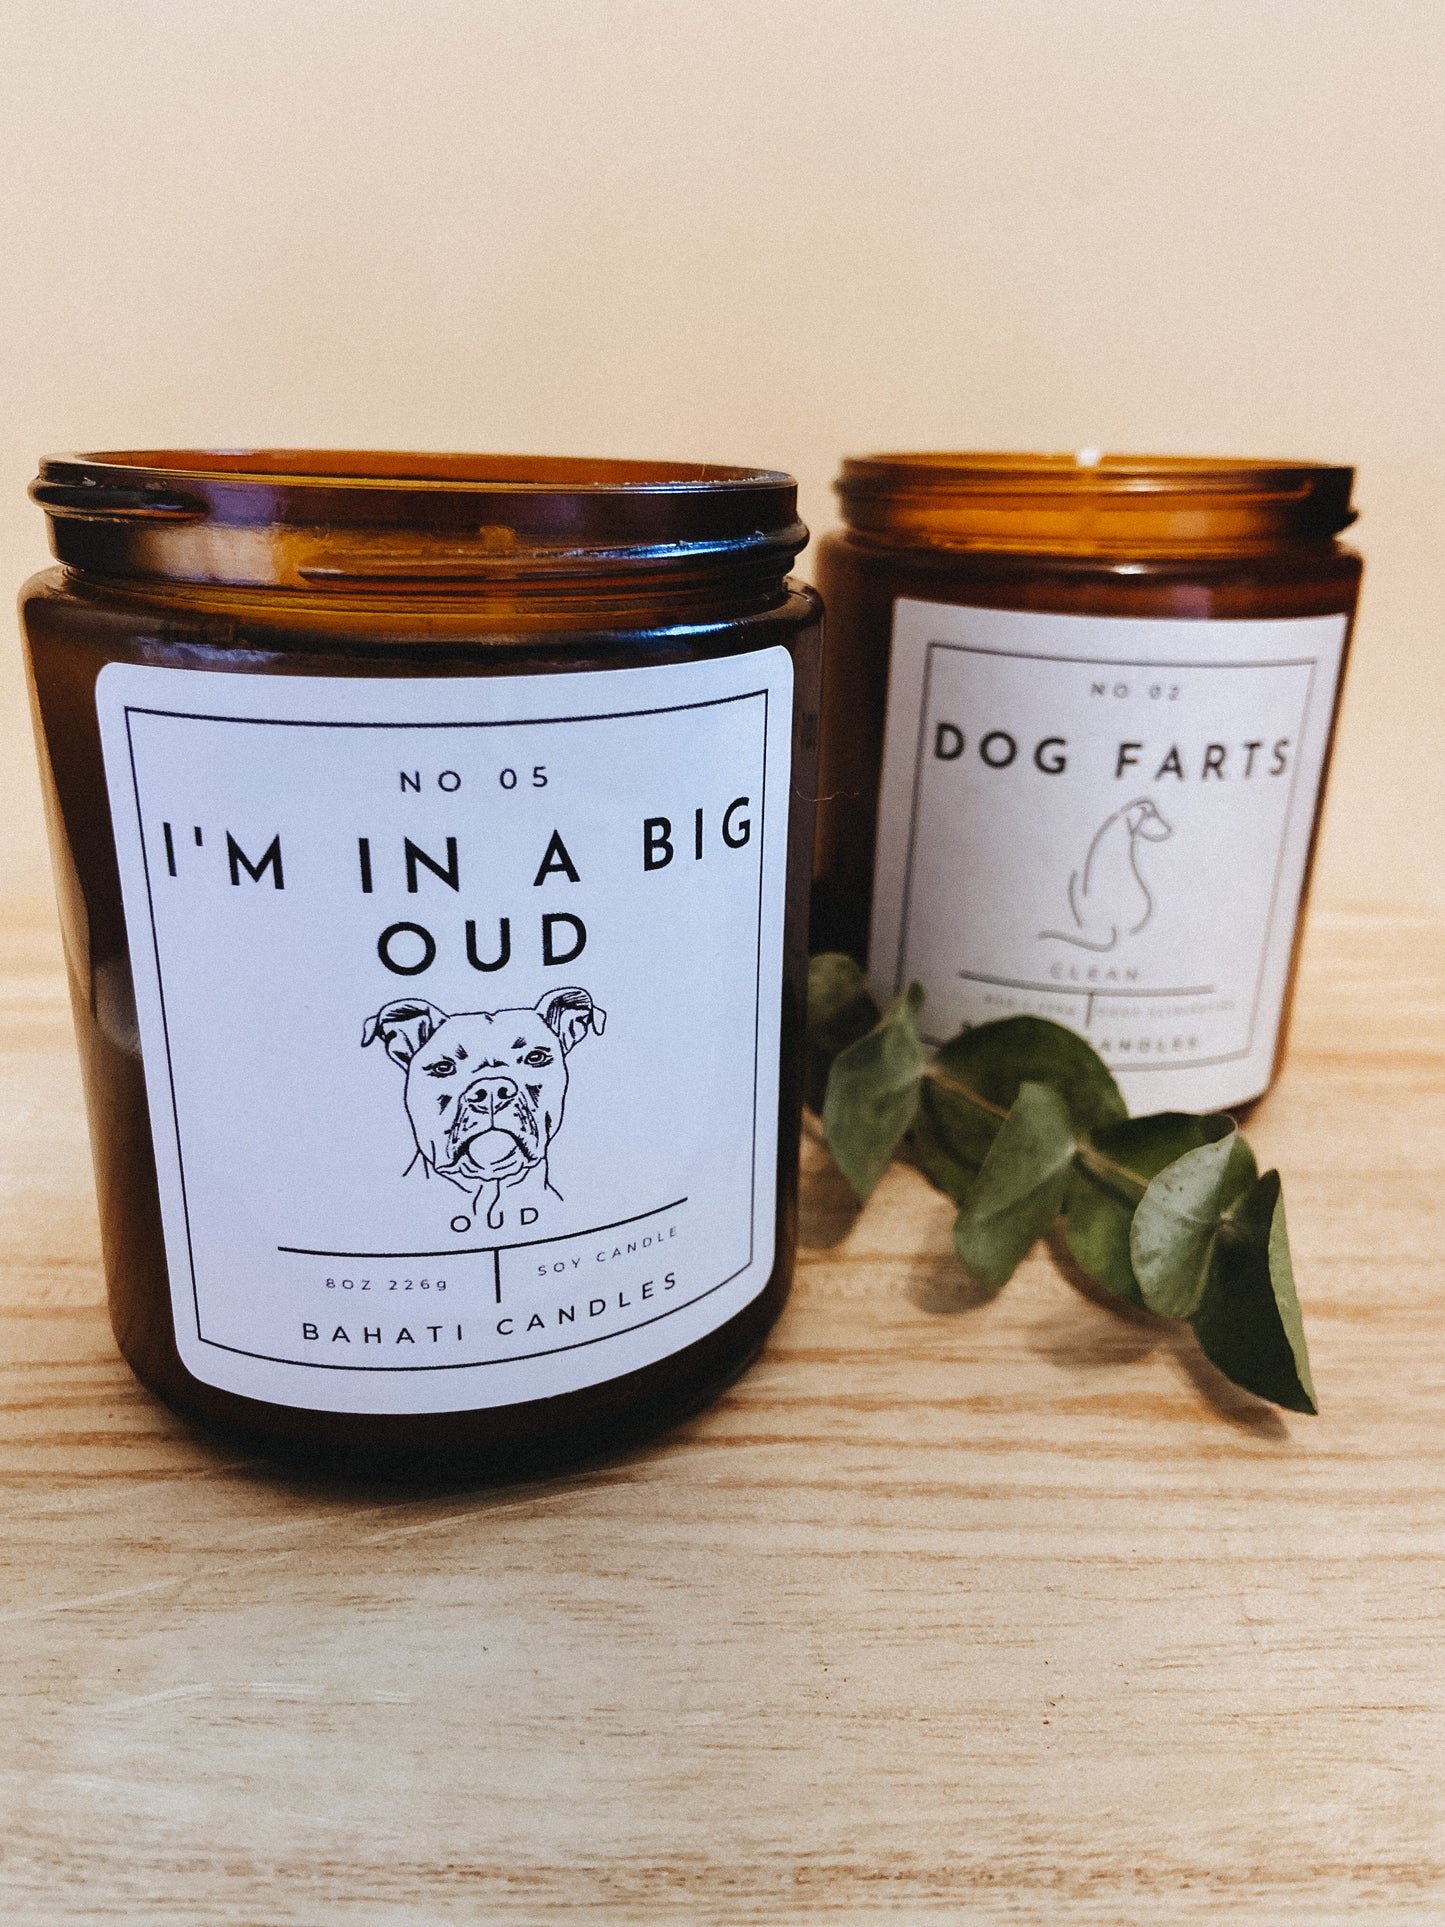 I'm in a big oud - 8 ounce candle